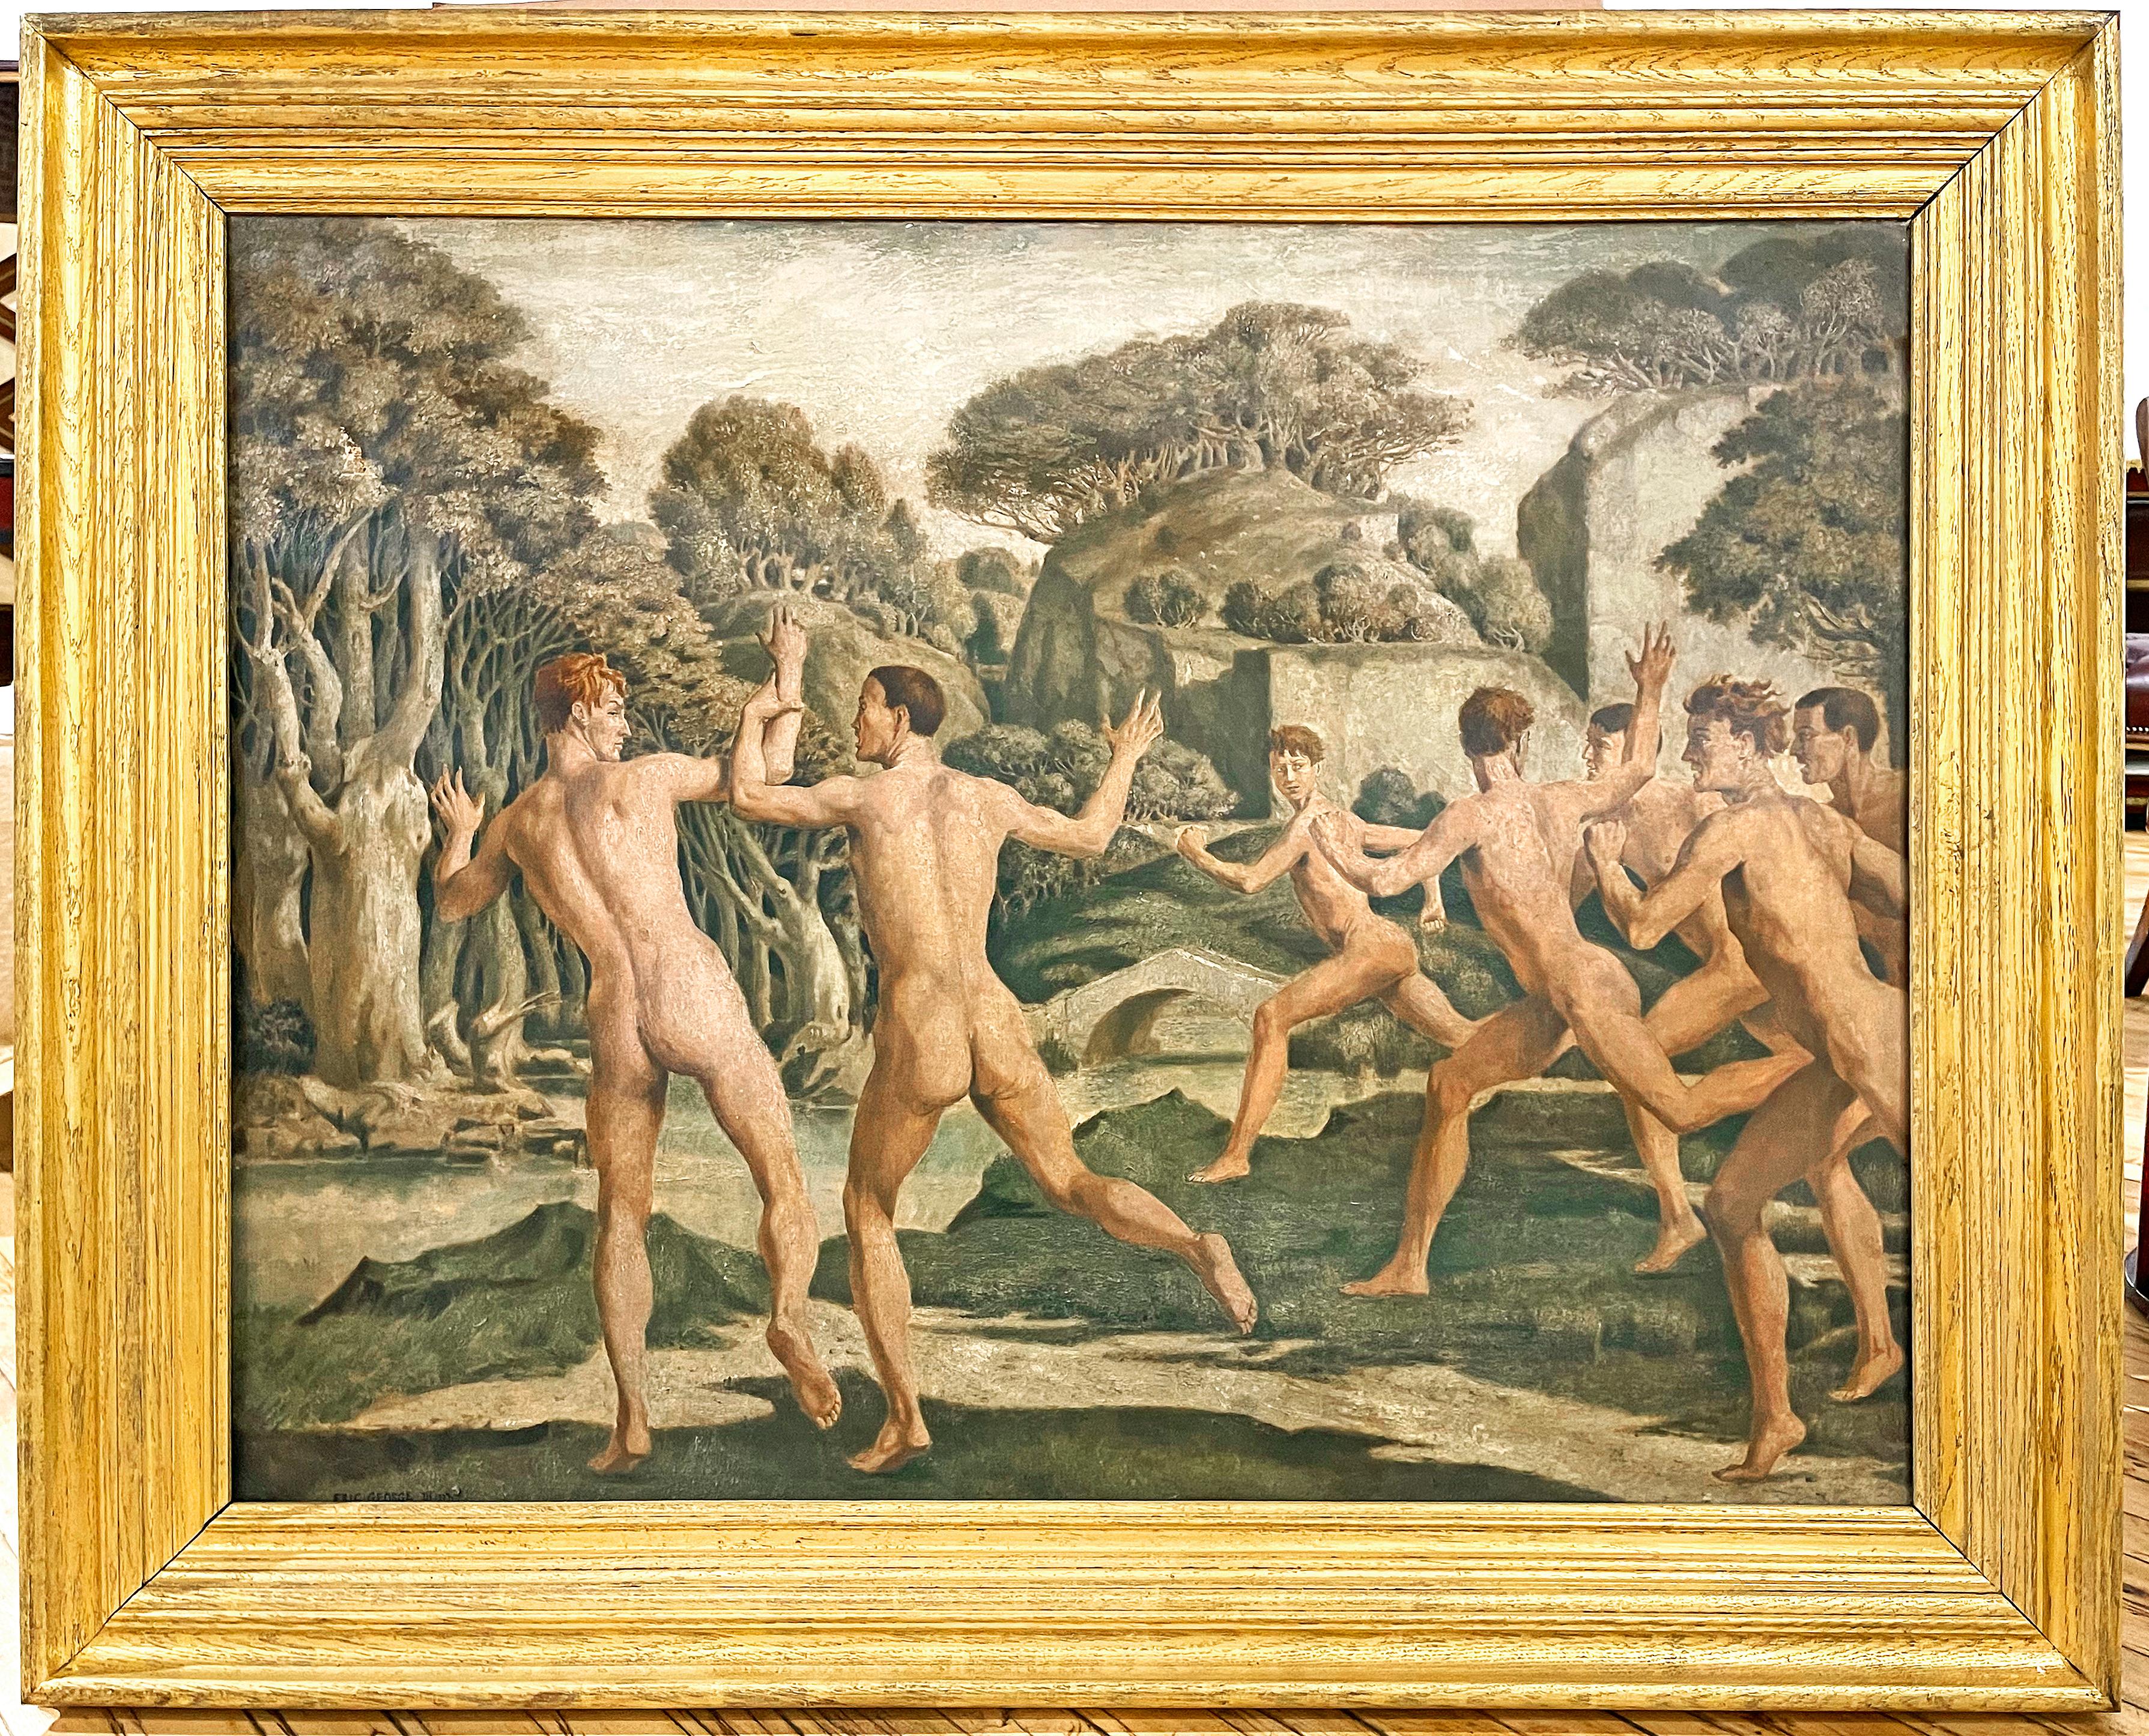 "Running Bathers," Large Art Deco Painting w/ Nude Males, 17th Venice Biennale